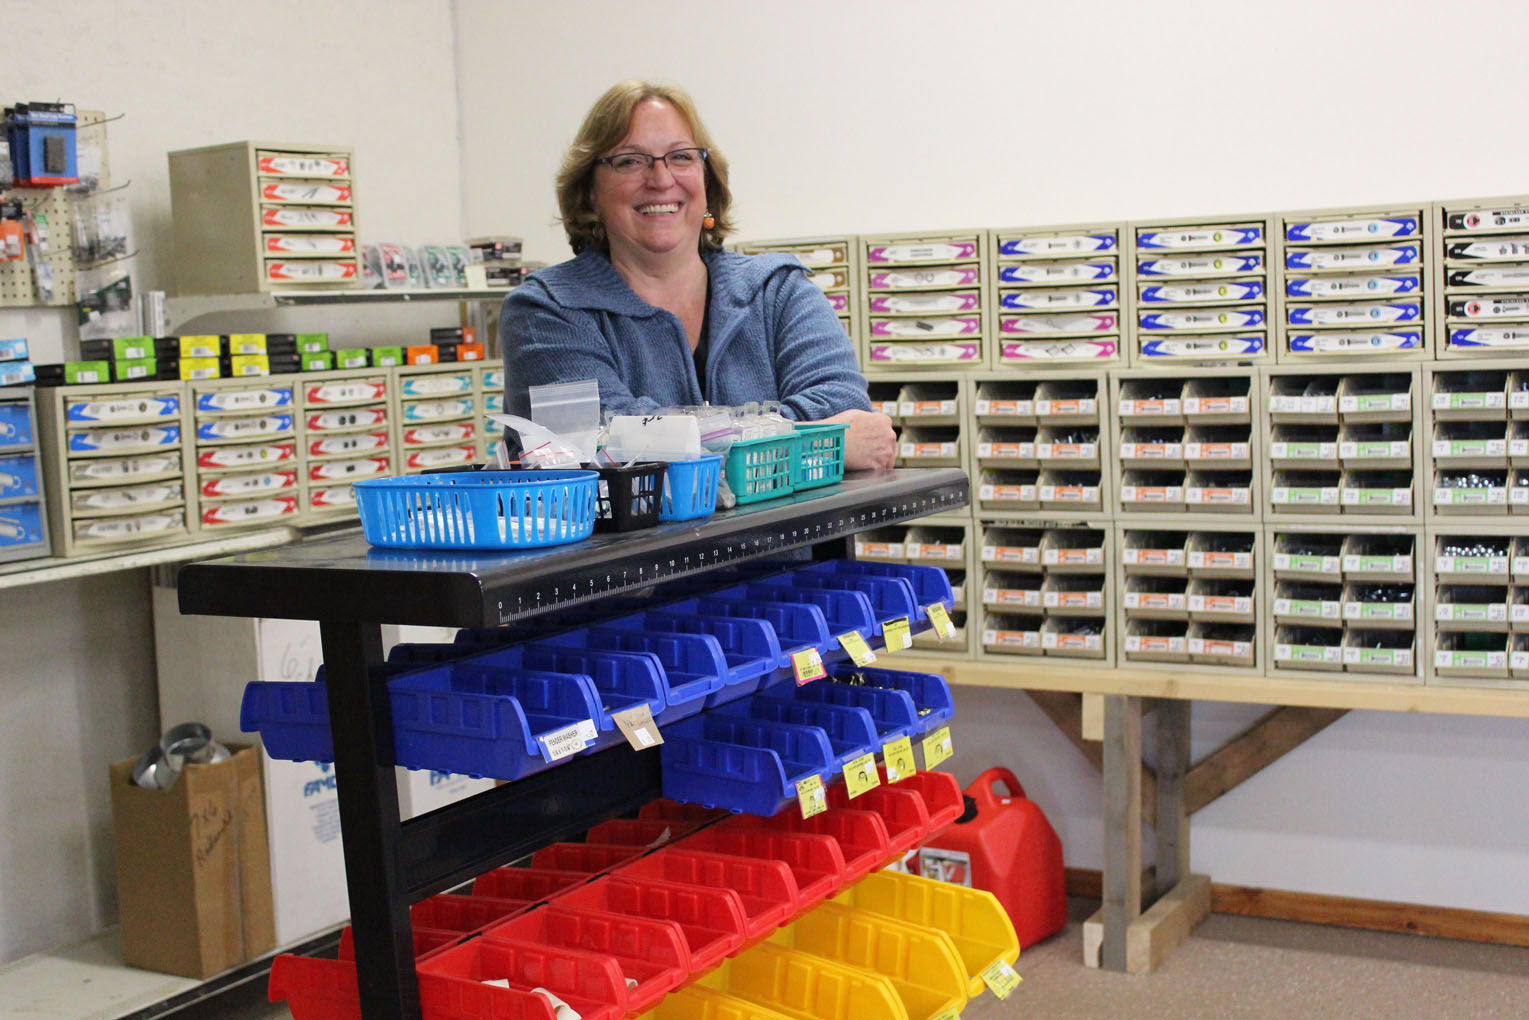 Surrounded by a display of hardware, Chyrell Richardson is enjoying meeting a community need with her new Anchor Point business, “Nutz and Bolts.”-Photo by McKibben Jackinsky, Homer News